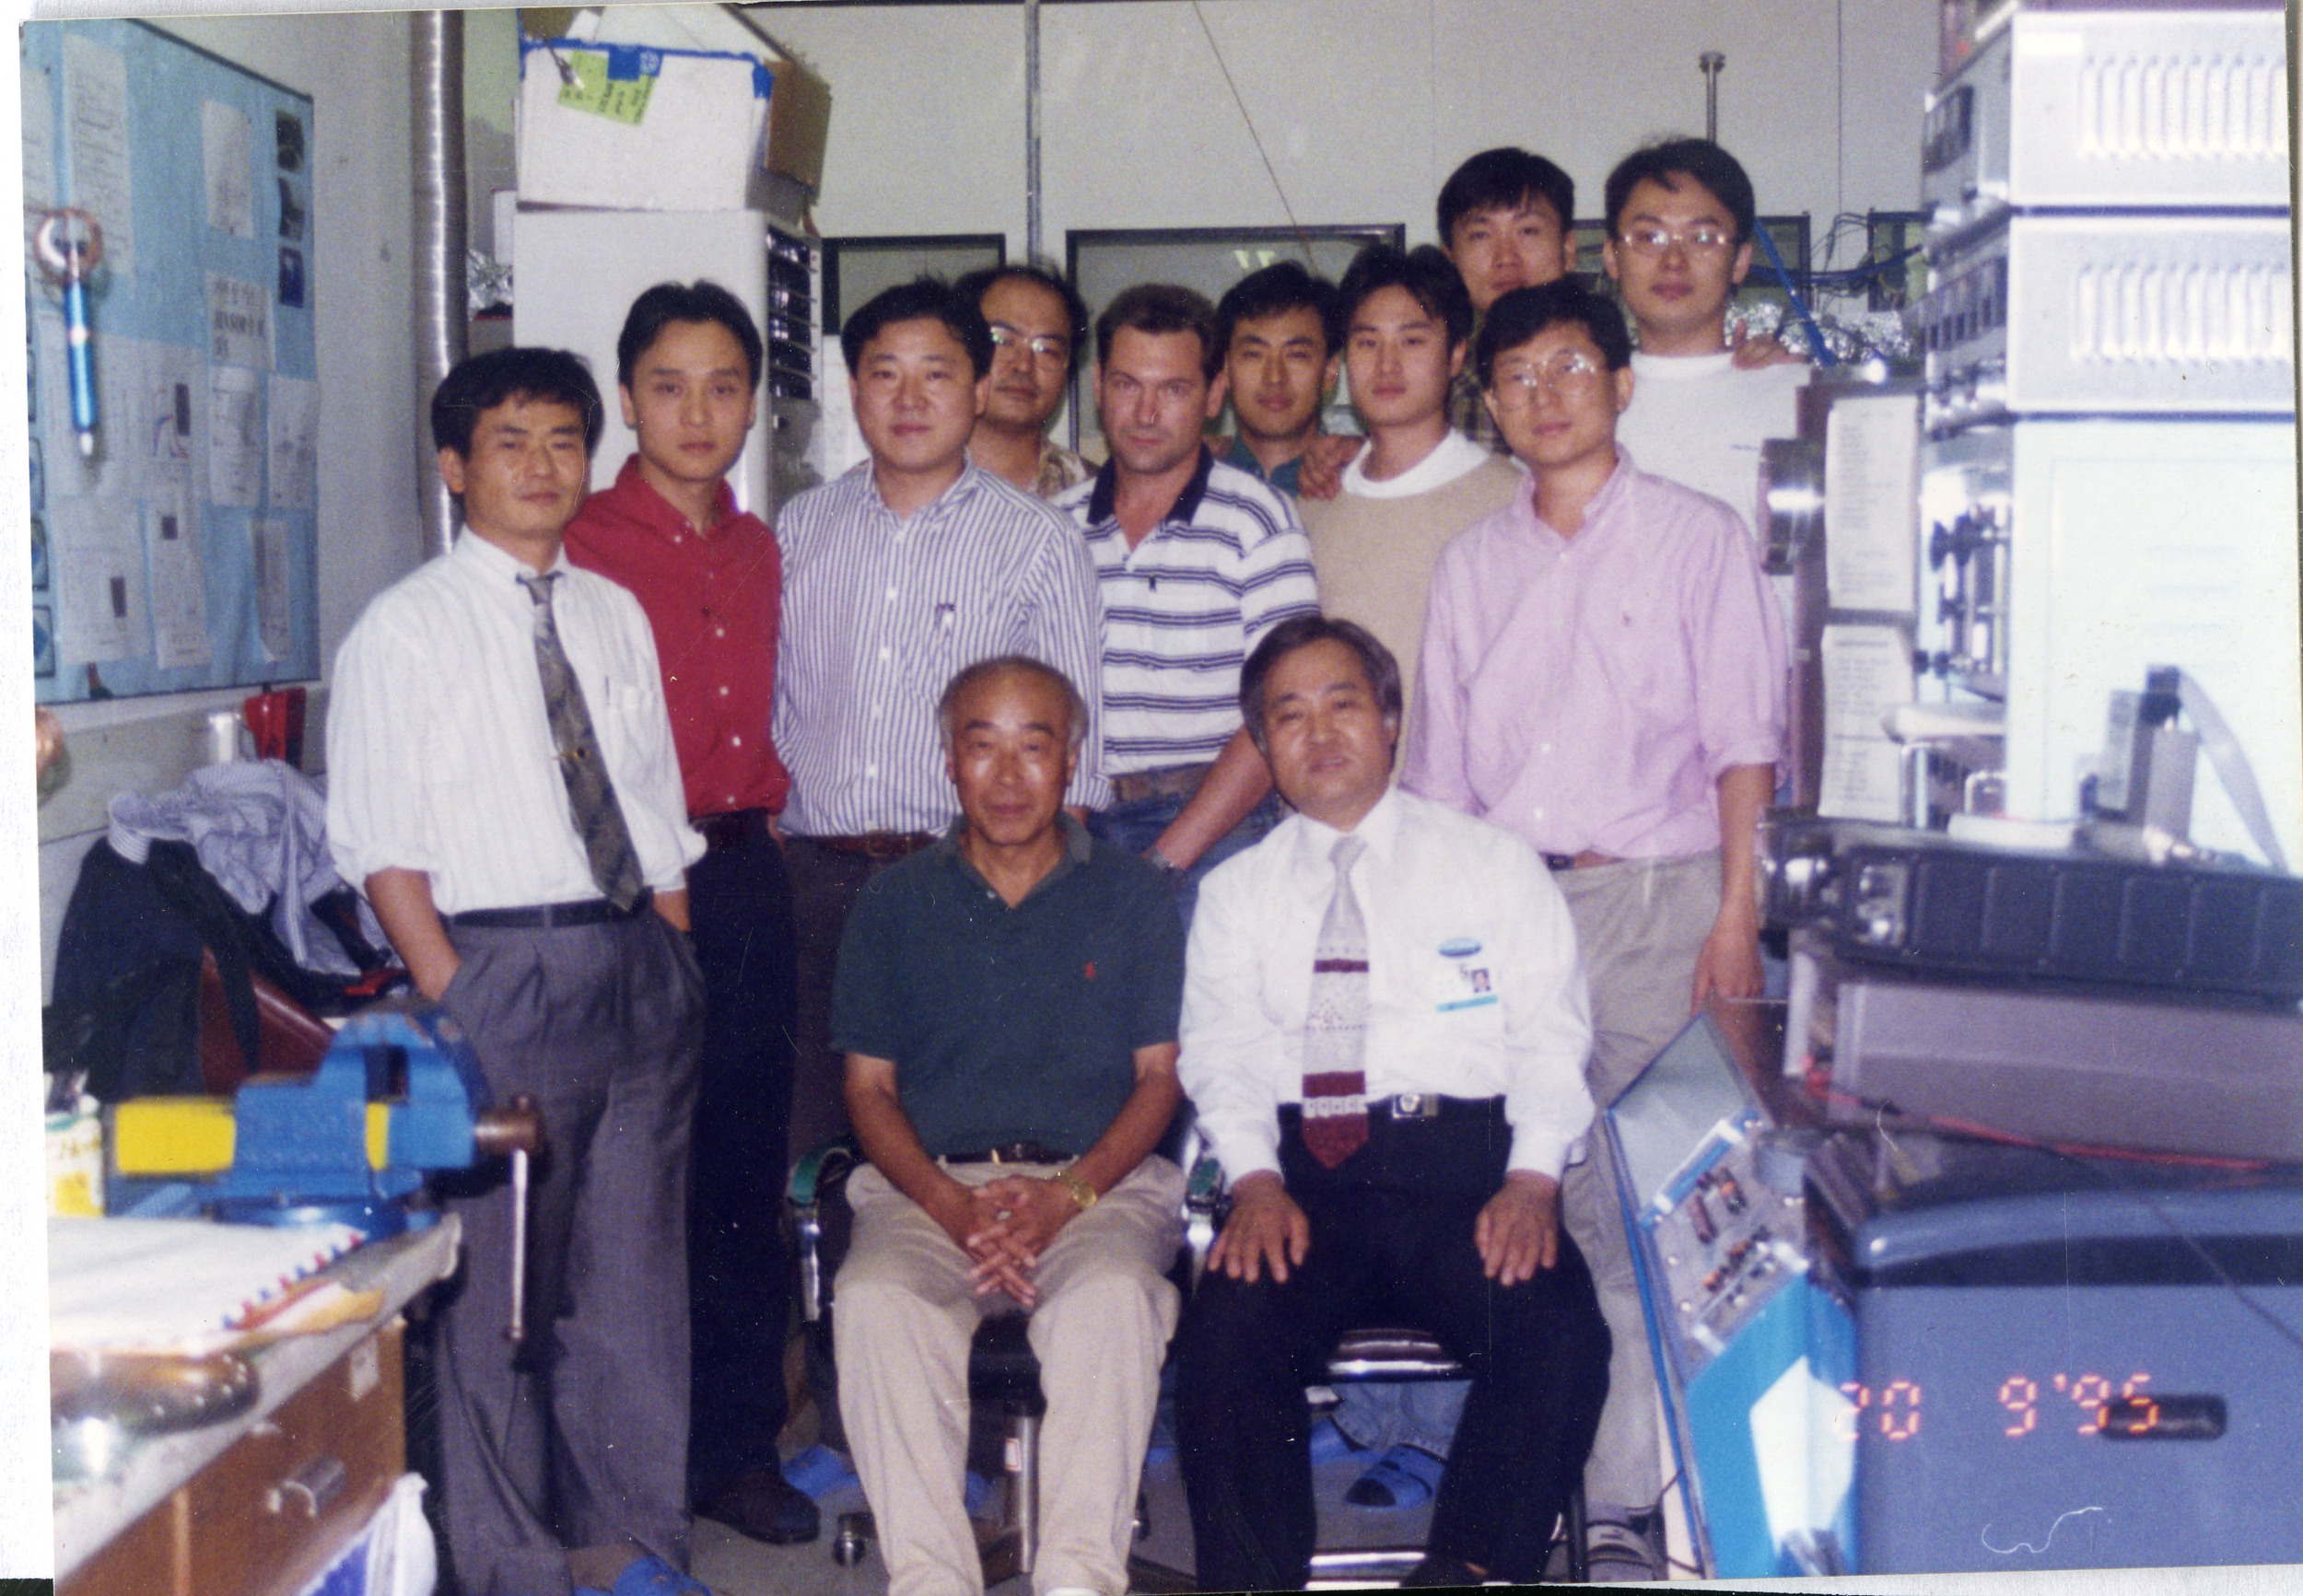 With colleagues and students at KIST, in Seoul, 1995